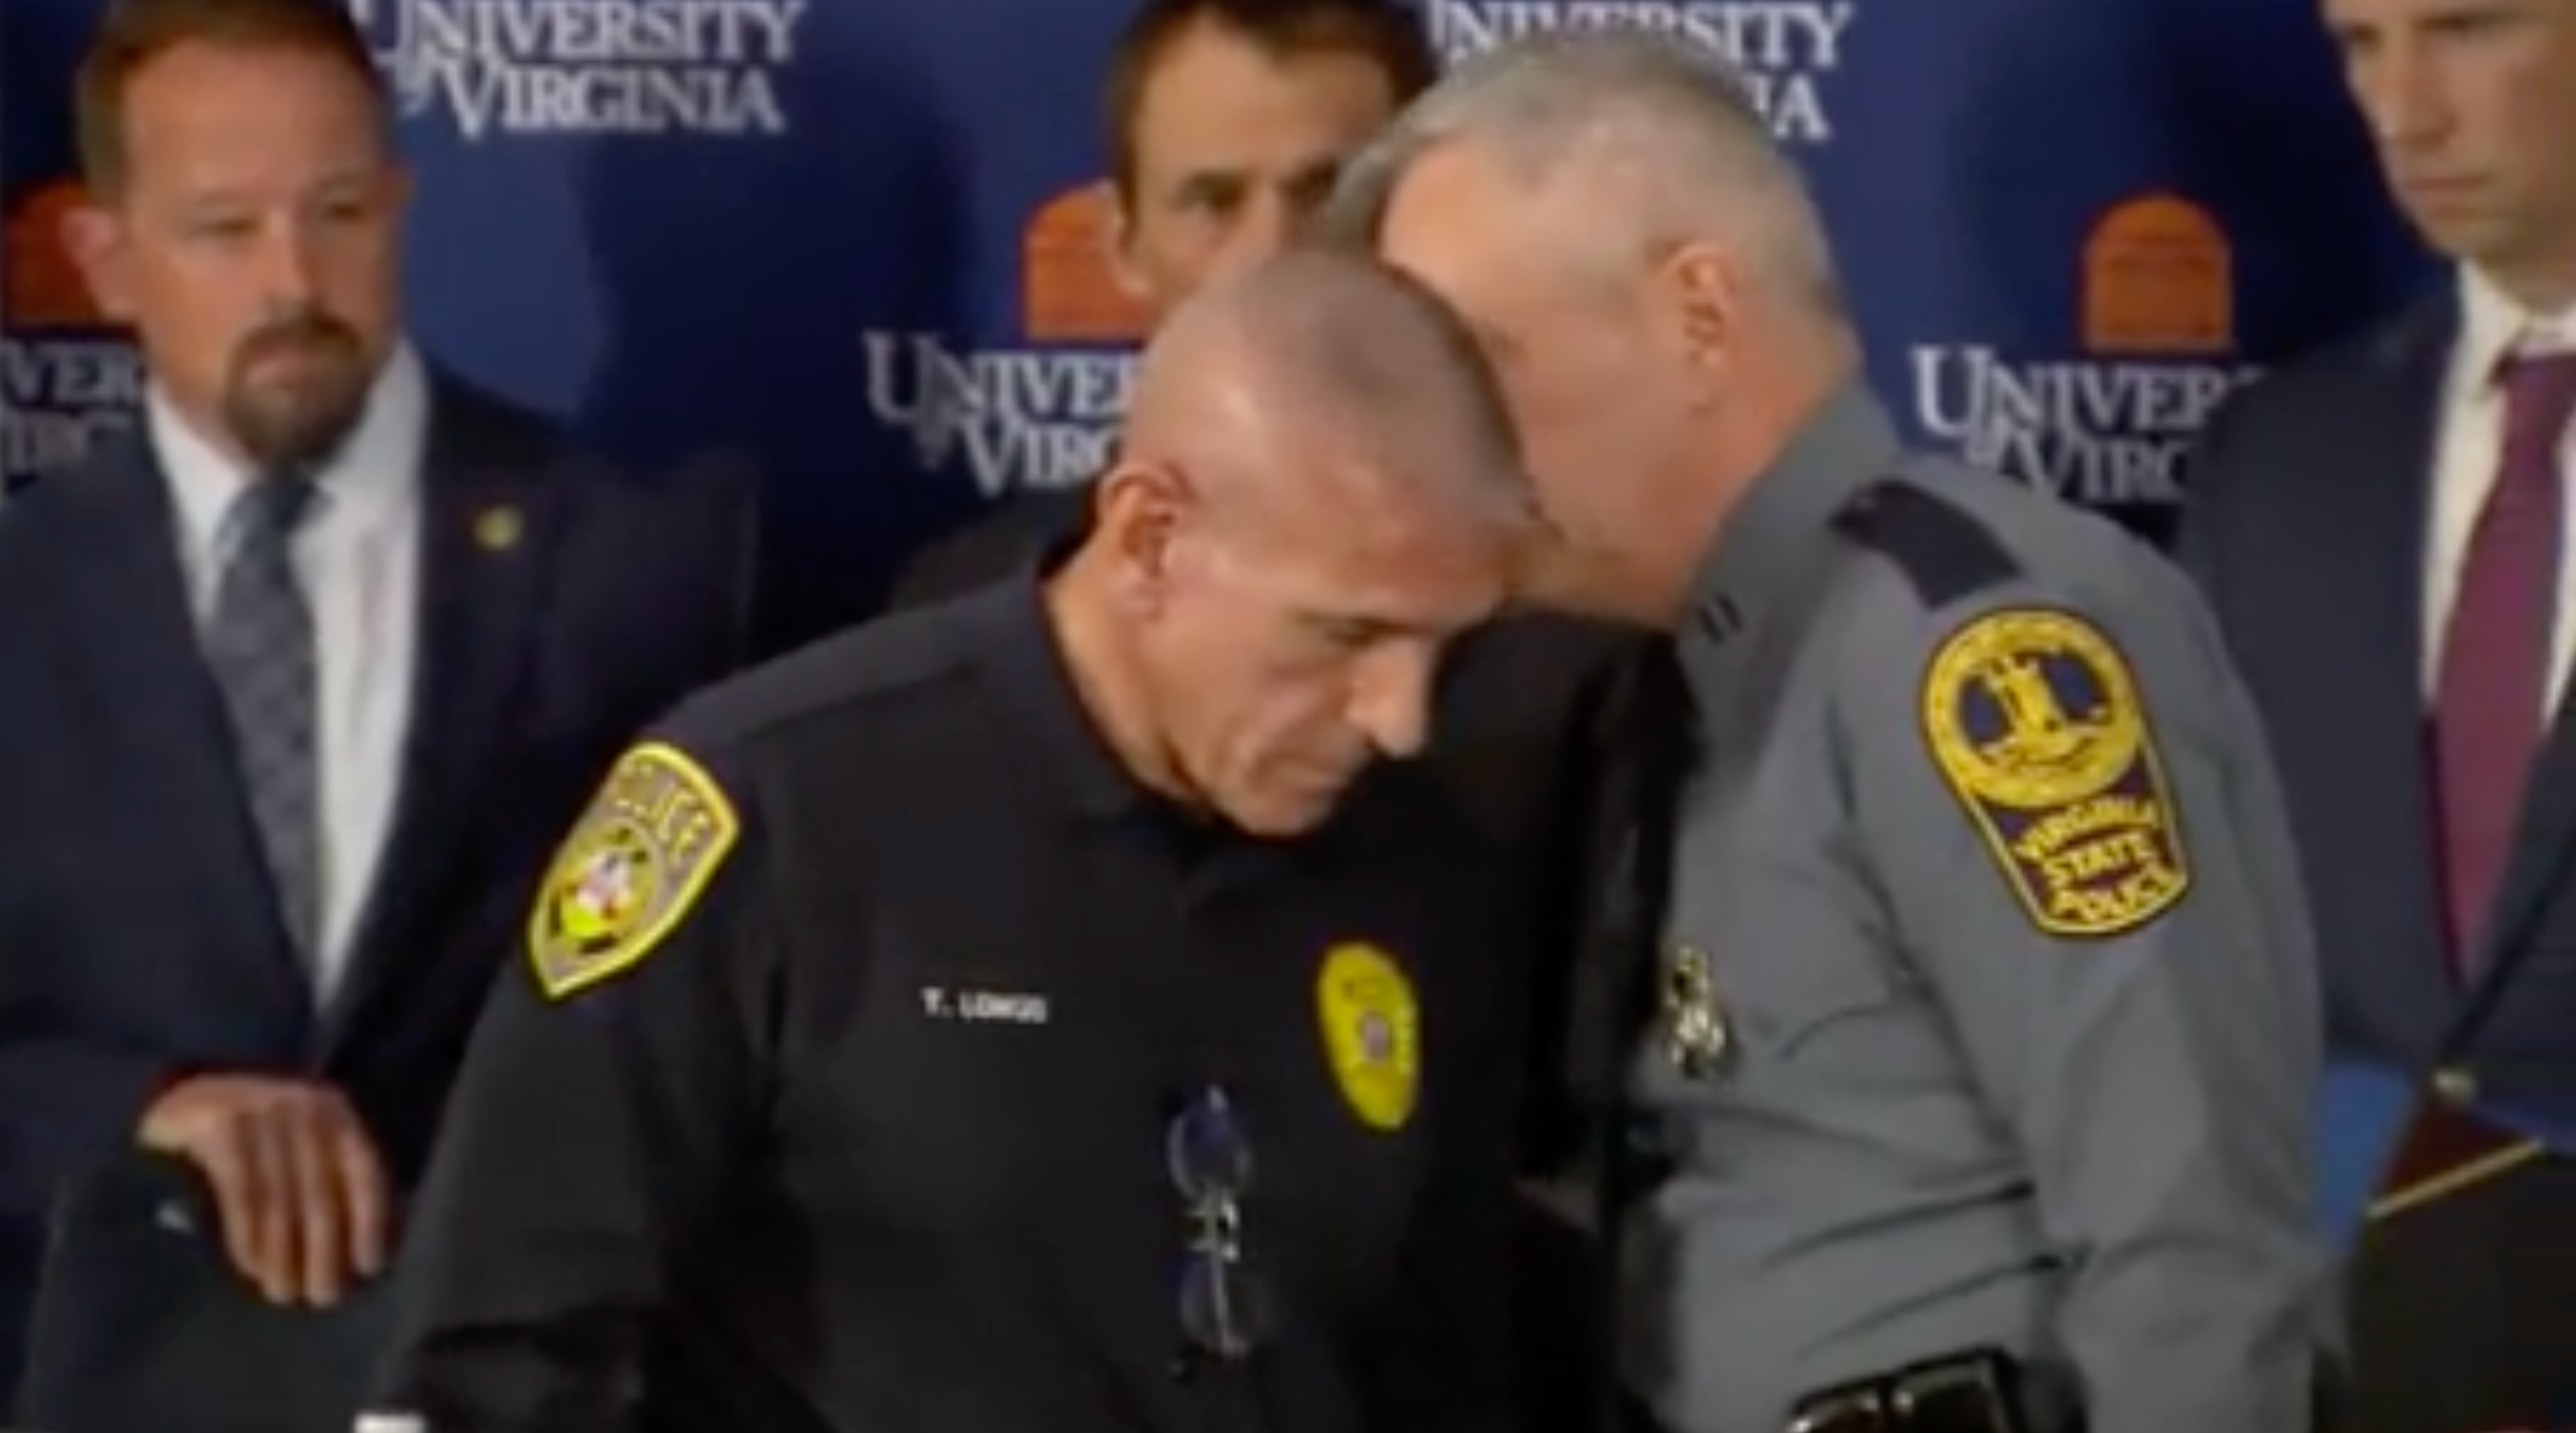 UVA Police Chief Tim Longo was holding a presser on Monday when he was informed that Christopher Darnell Jones had been arrested